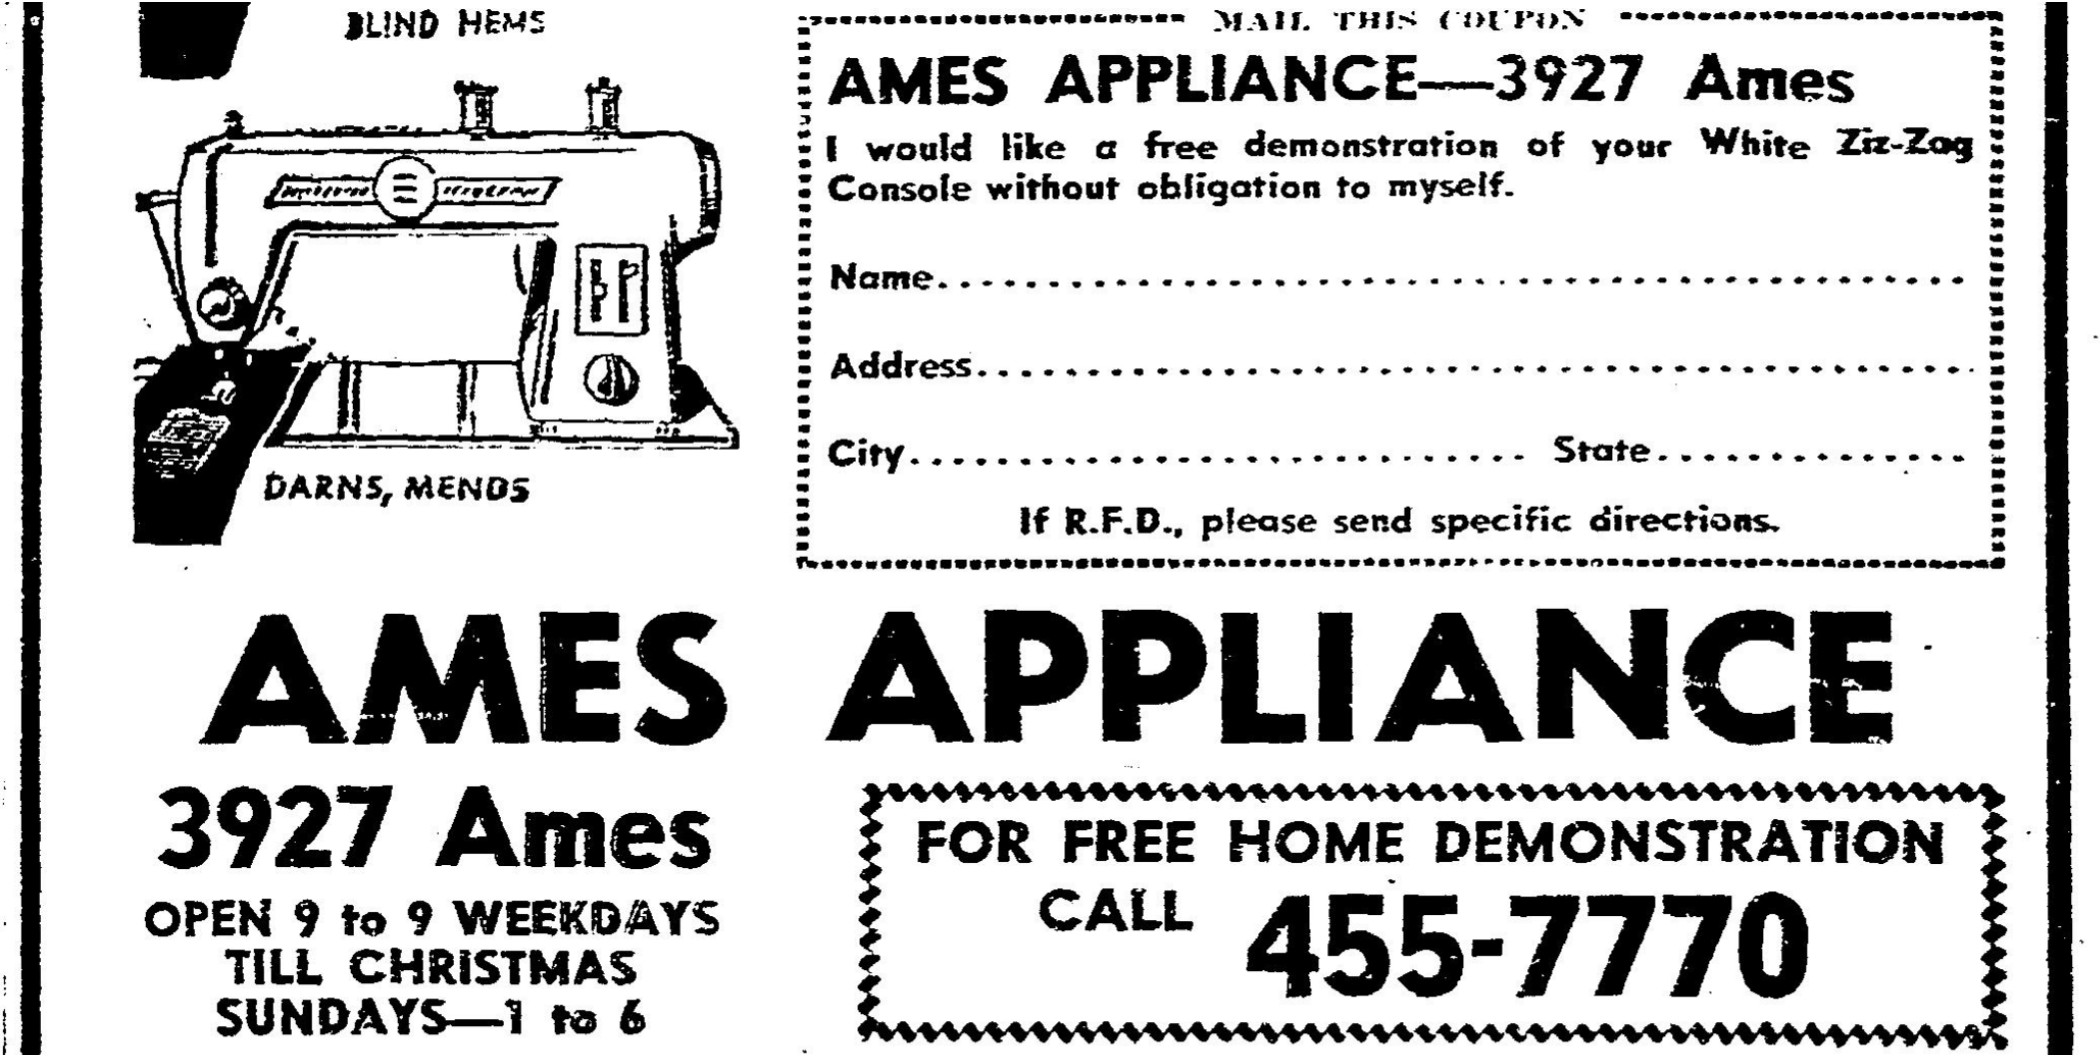 Ames Appliance was located at 3927 Ames Avenue in North Omaha, Nebraska, in the 1950s.